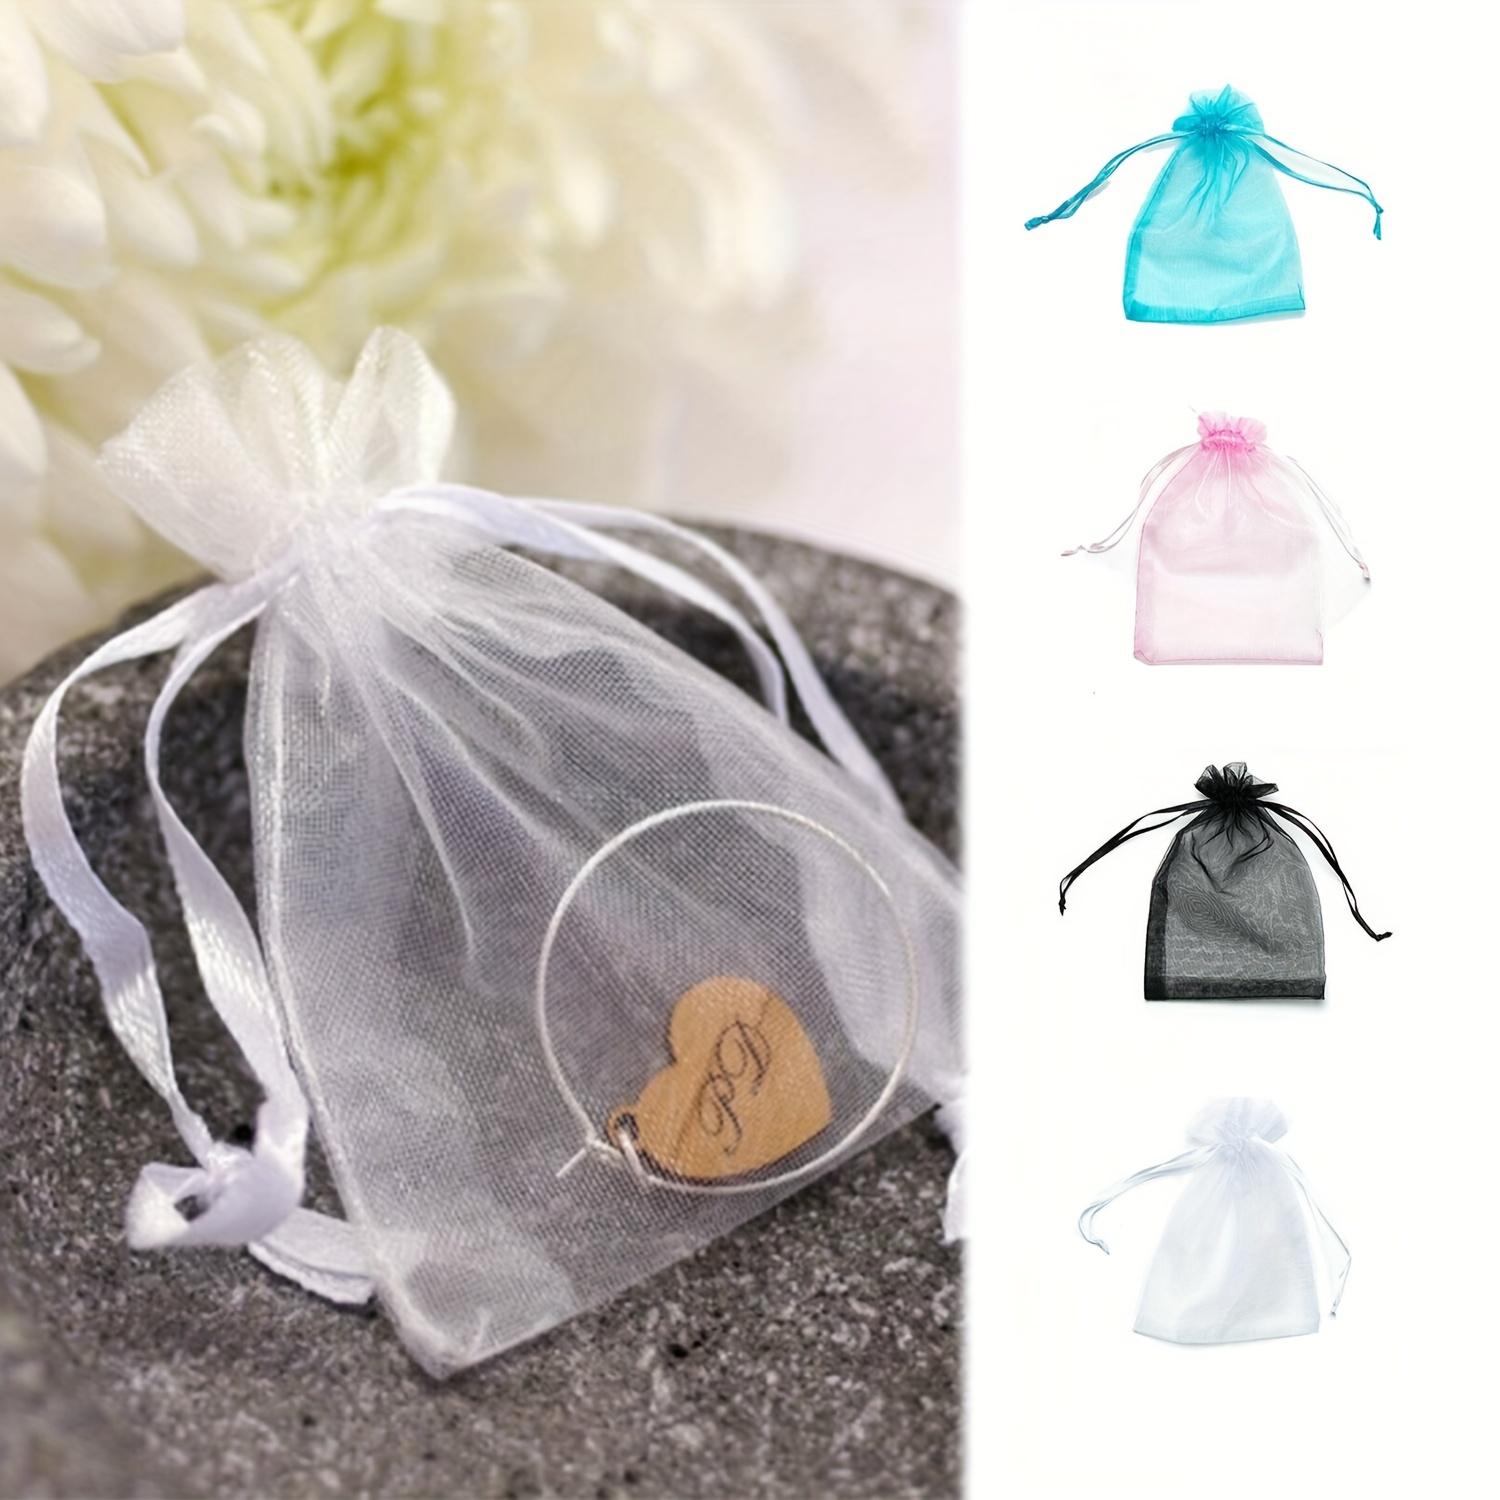 200 Sheer Organza Bags for Wedding Party Favor Bags - Small Mesh Bags  Drawstring Pouch Sachet Bags Jewelry Bags for Small Business 4 X 6 Inches  Mixed